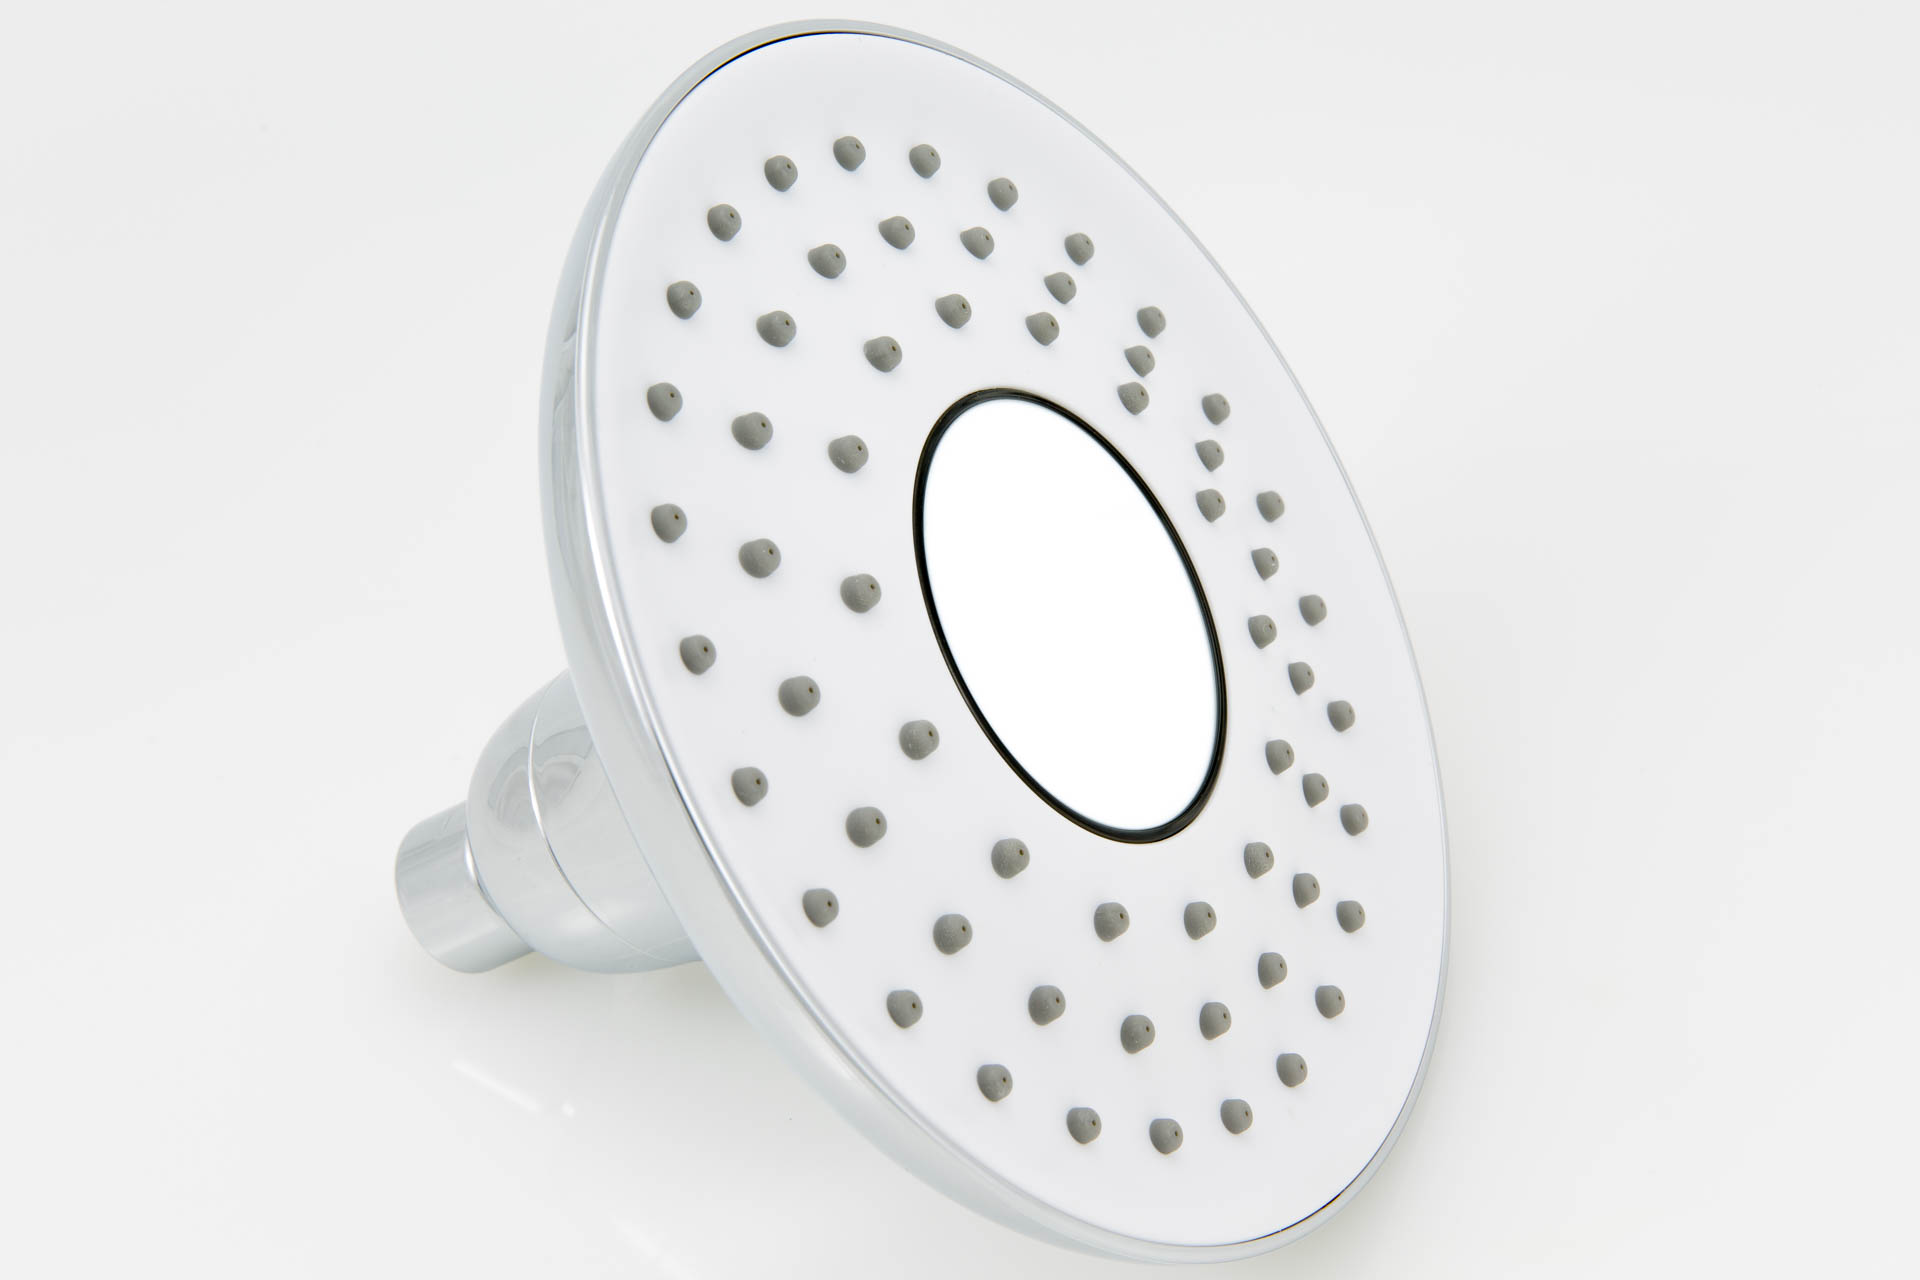 Out of the box, the WaterHawk has a maximum water flow rate of 2.0 gpm, so it will begin saving water over the standard 2.5 gpm showerheads the moment it is installed. Image: Digitized House.